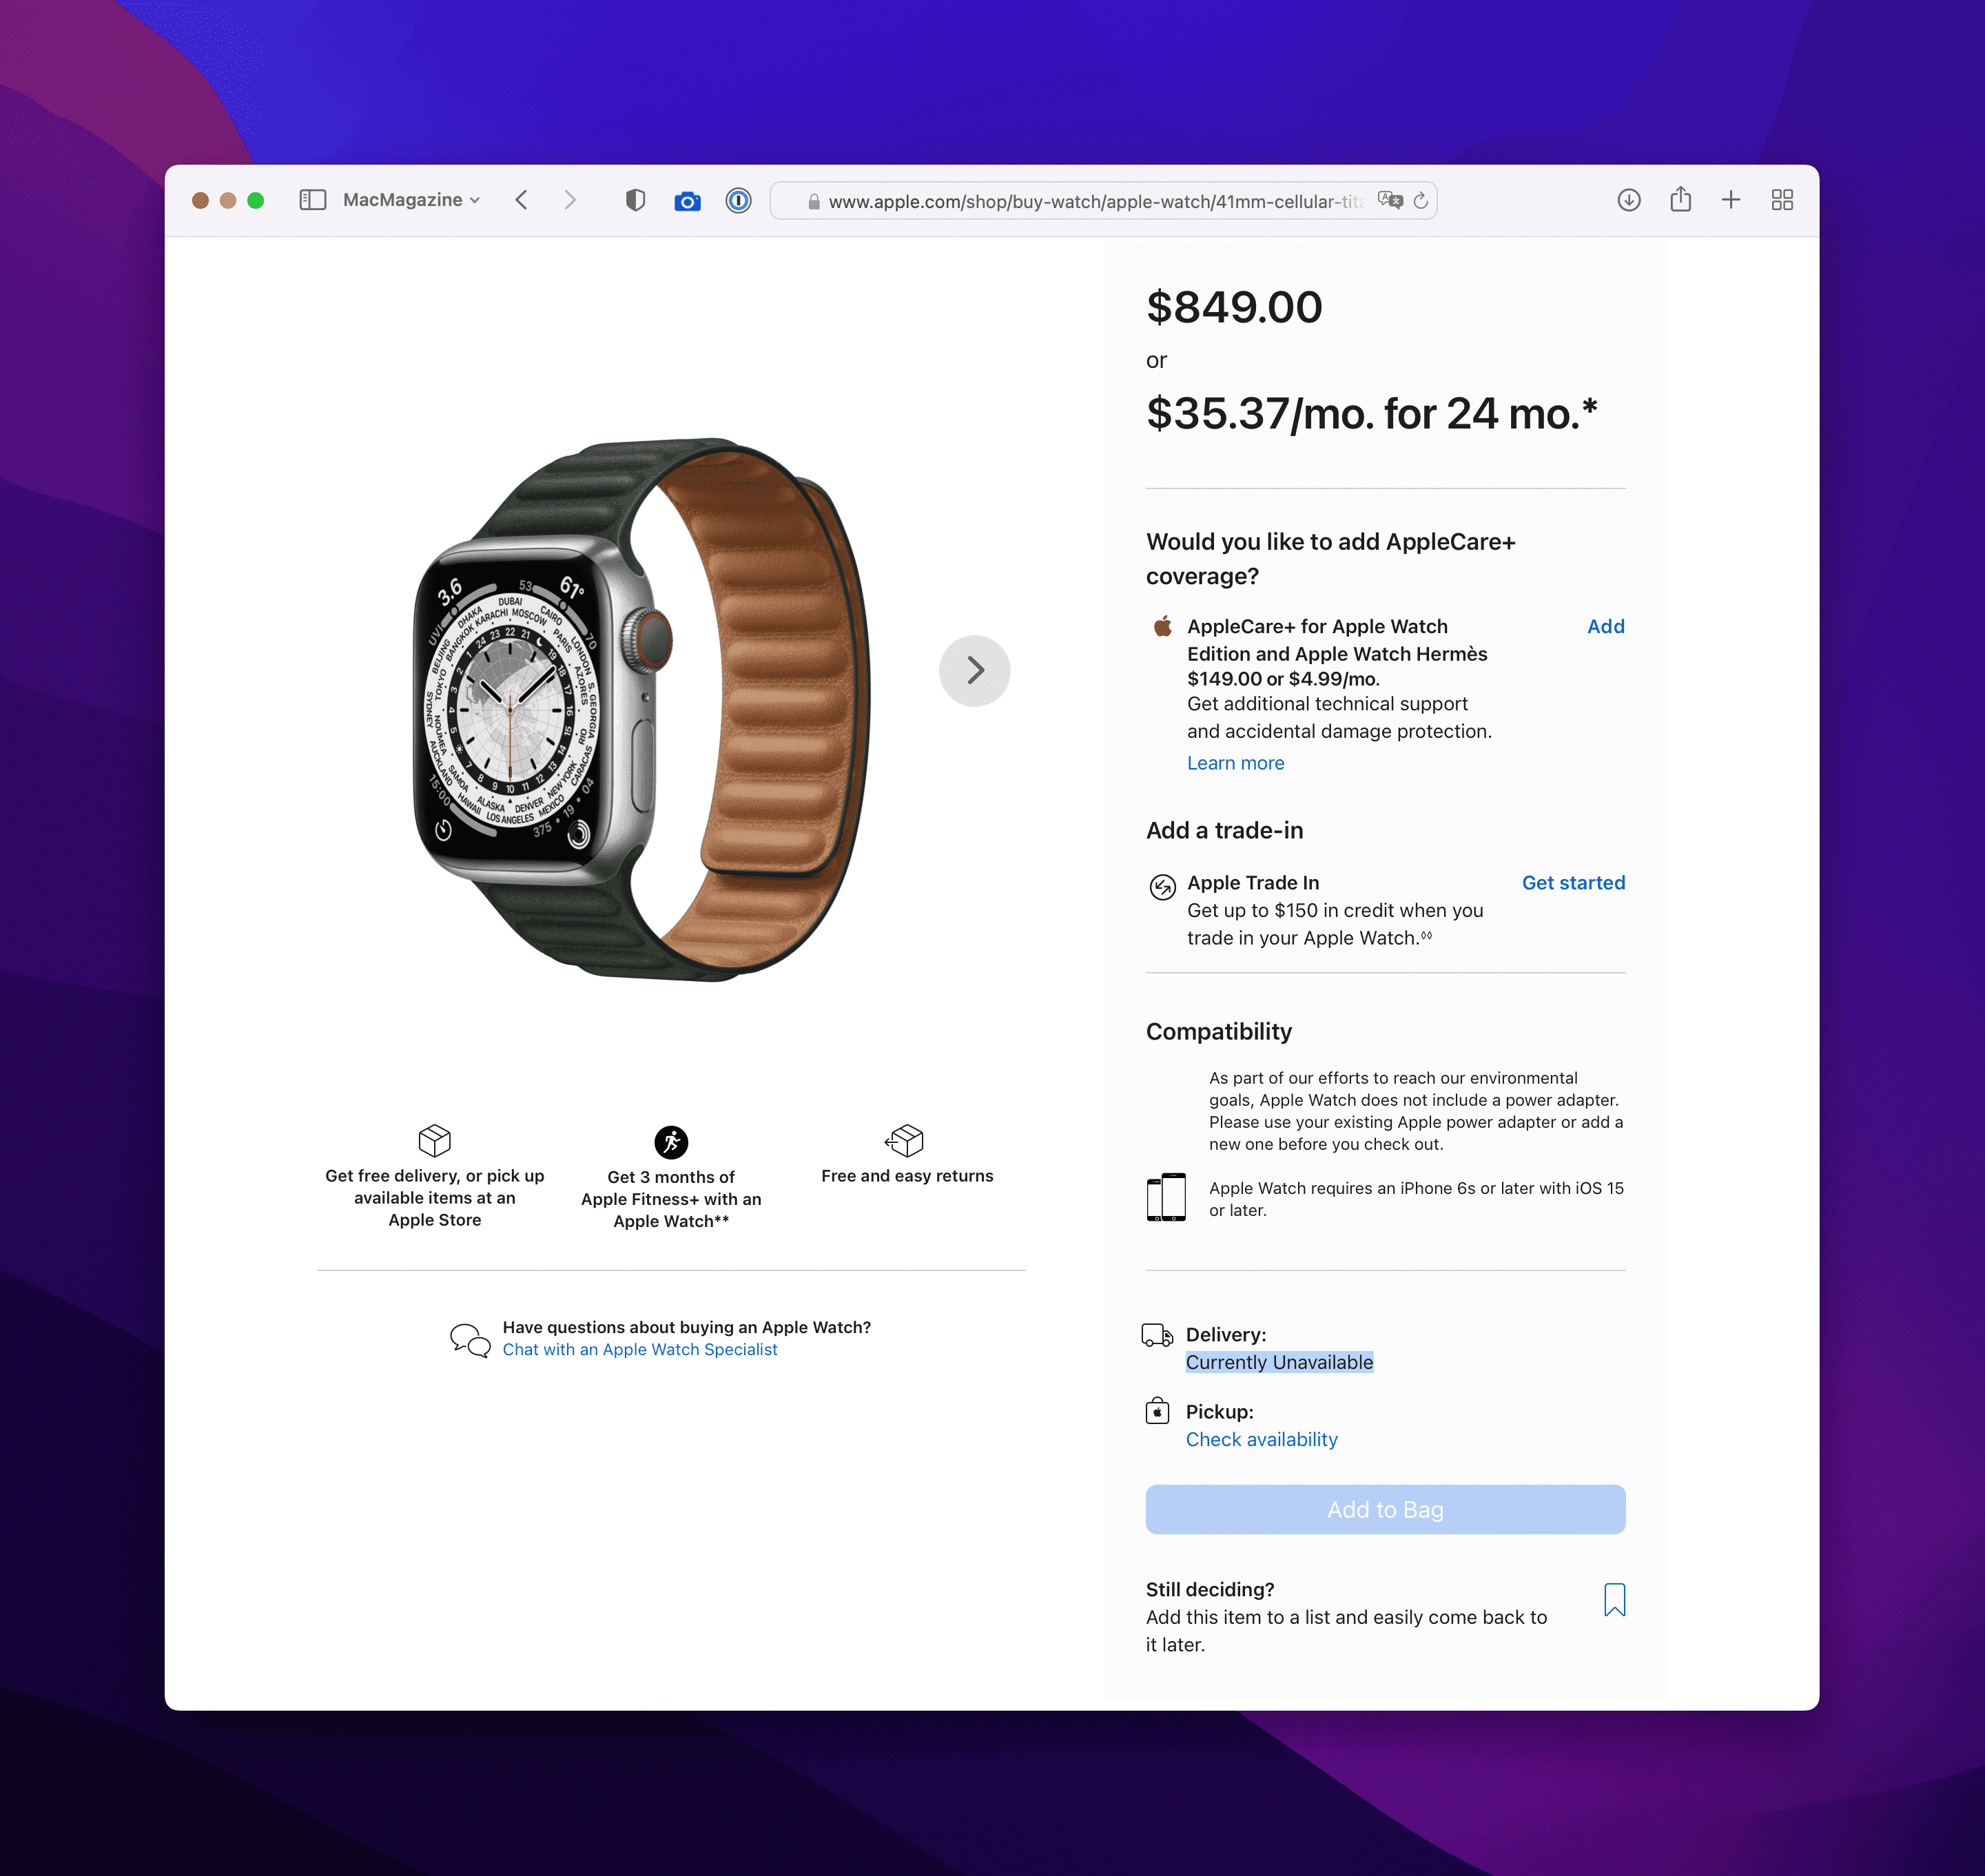 Apple Watch Edition is stock